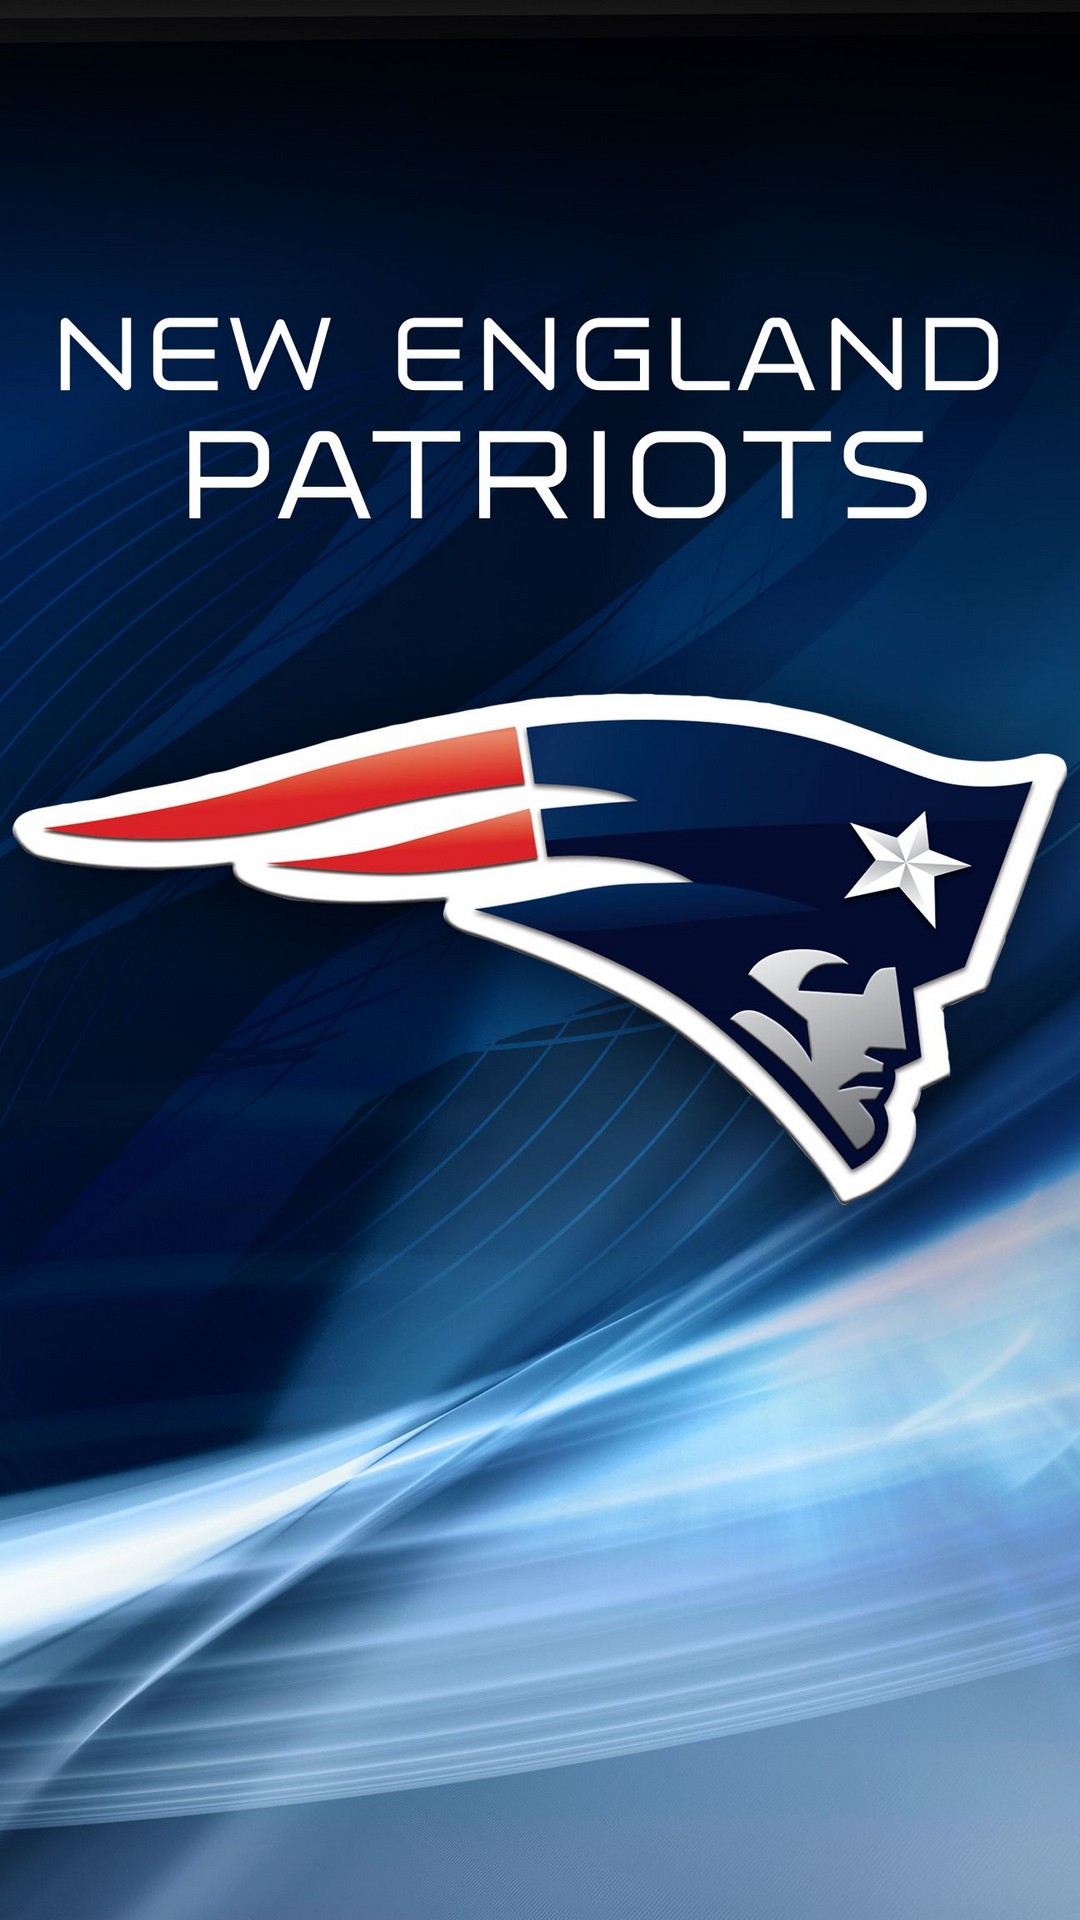 Wallpapers iPhone NE Patriots With high-resolution 1080X1920 pixel. Donwload and set as wallpaper for your iPhone X, iPhone XS home screen backgrounds, XS Max, XR, iPhone8 lock screen wallpaper, iPhone 7, 6, SE, and other mobile devices